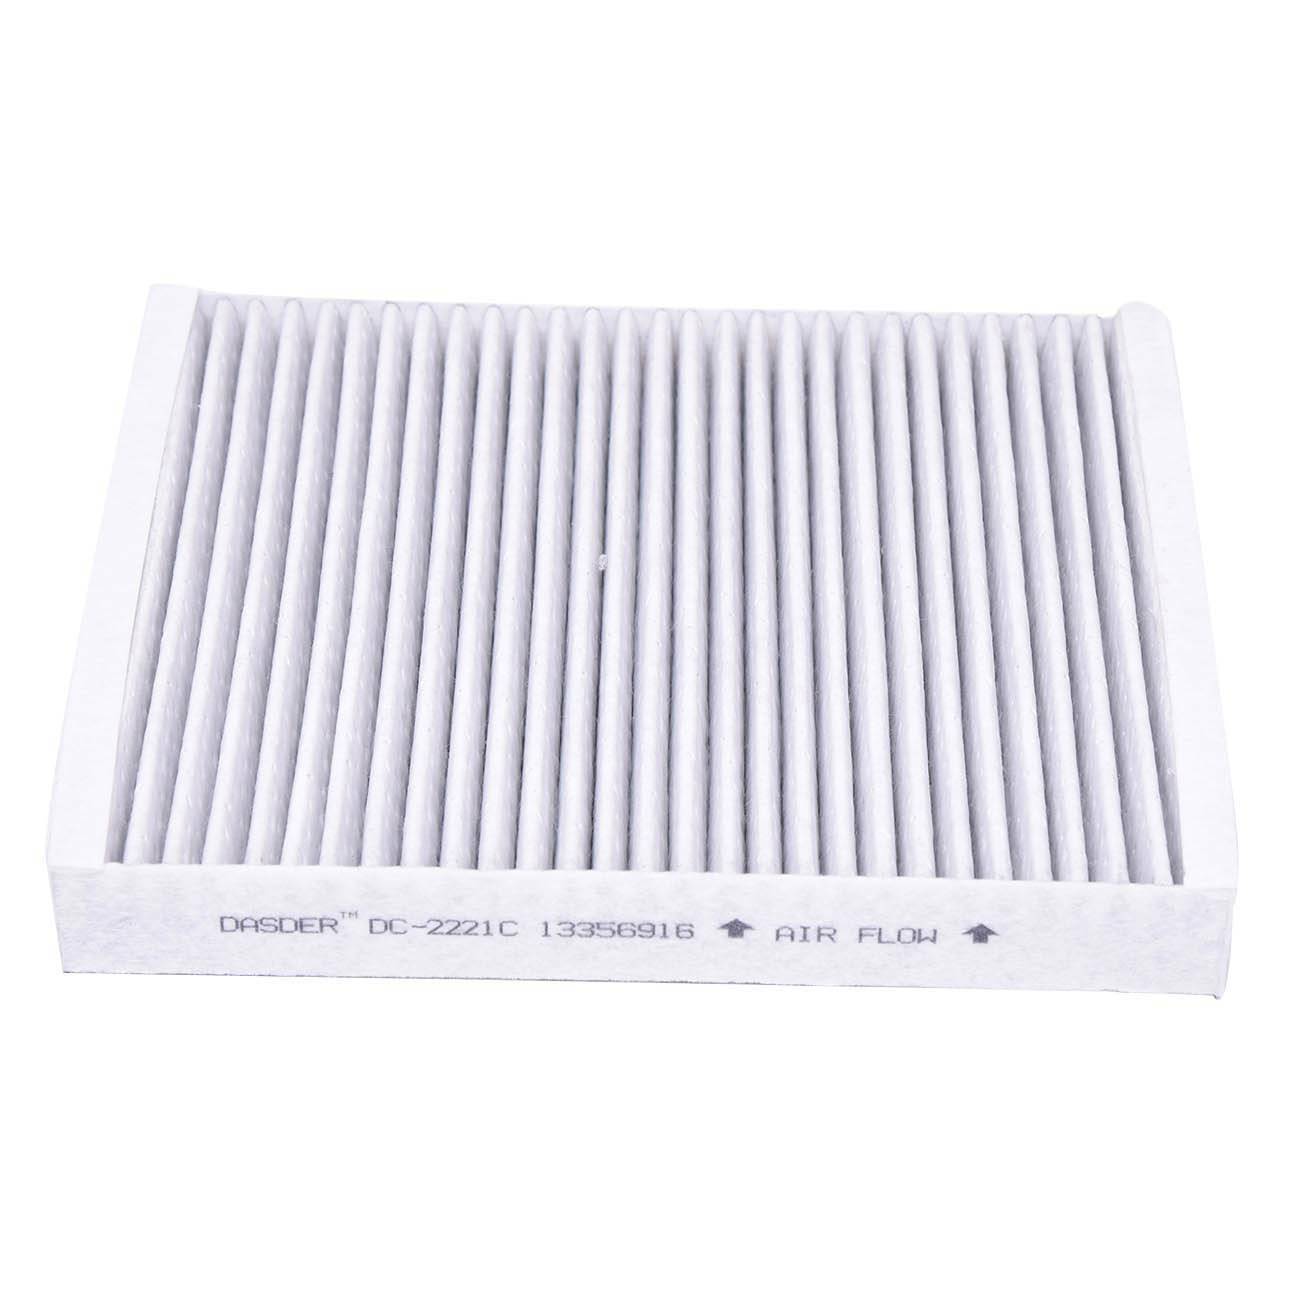 Cabin Air Filter for Buick Envision LaCrosse Cadillac ATS CT6 GMC 13356916